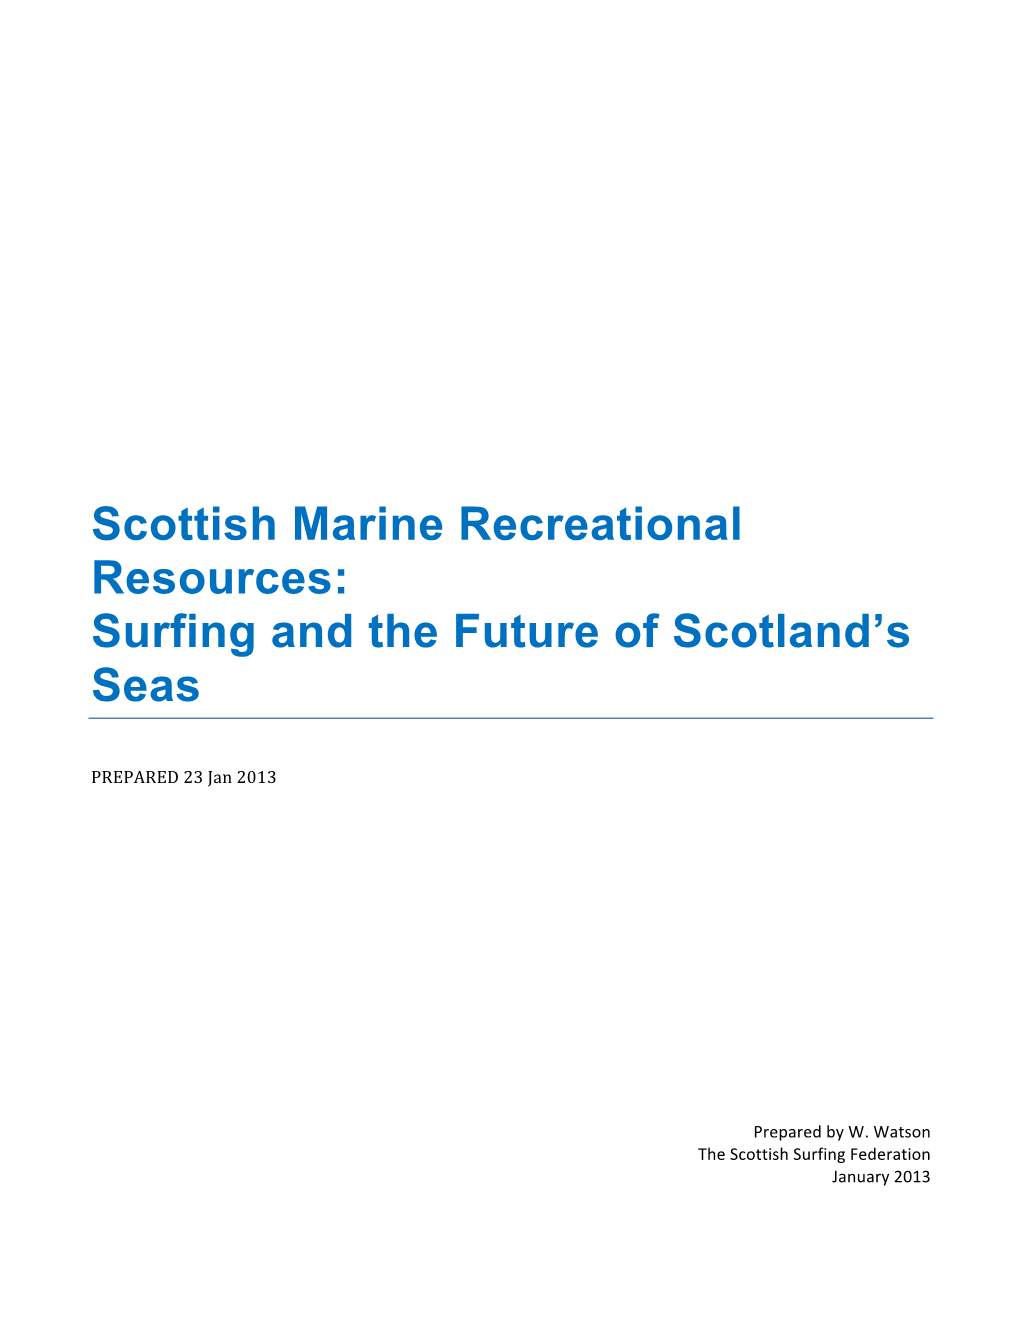 Surfing and the Future of Scotlands Seas